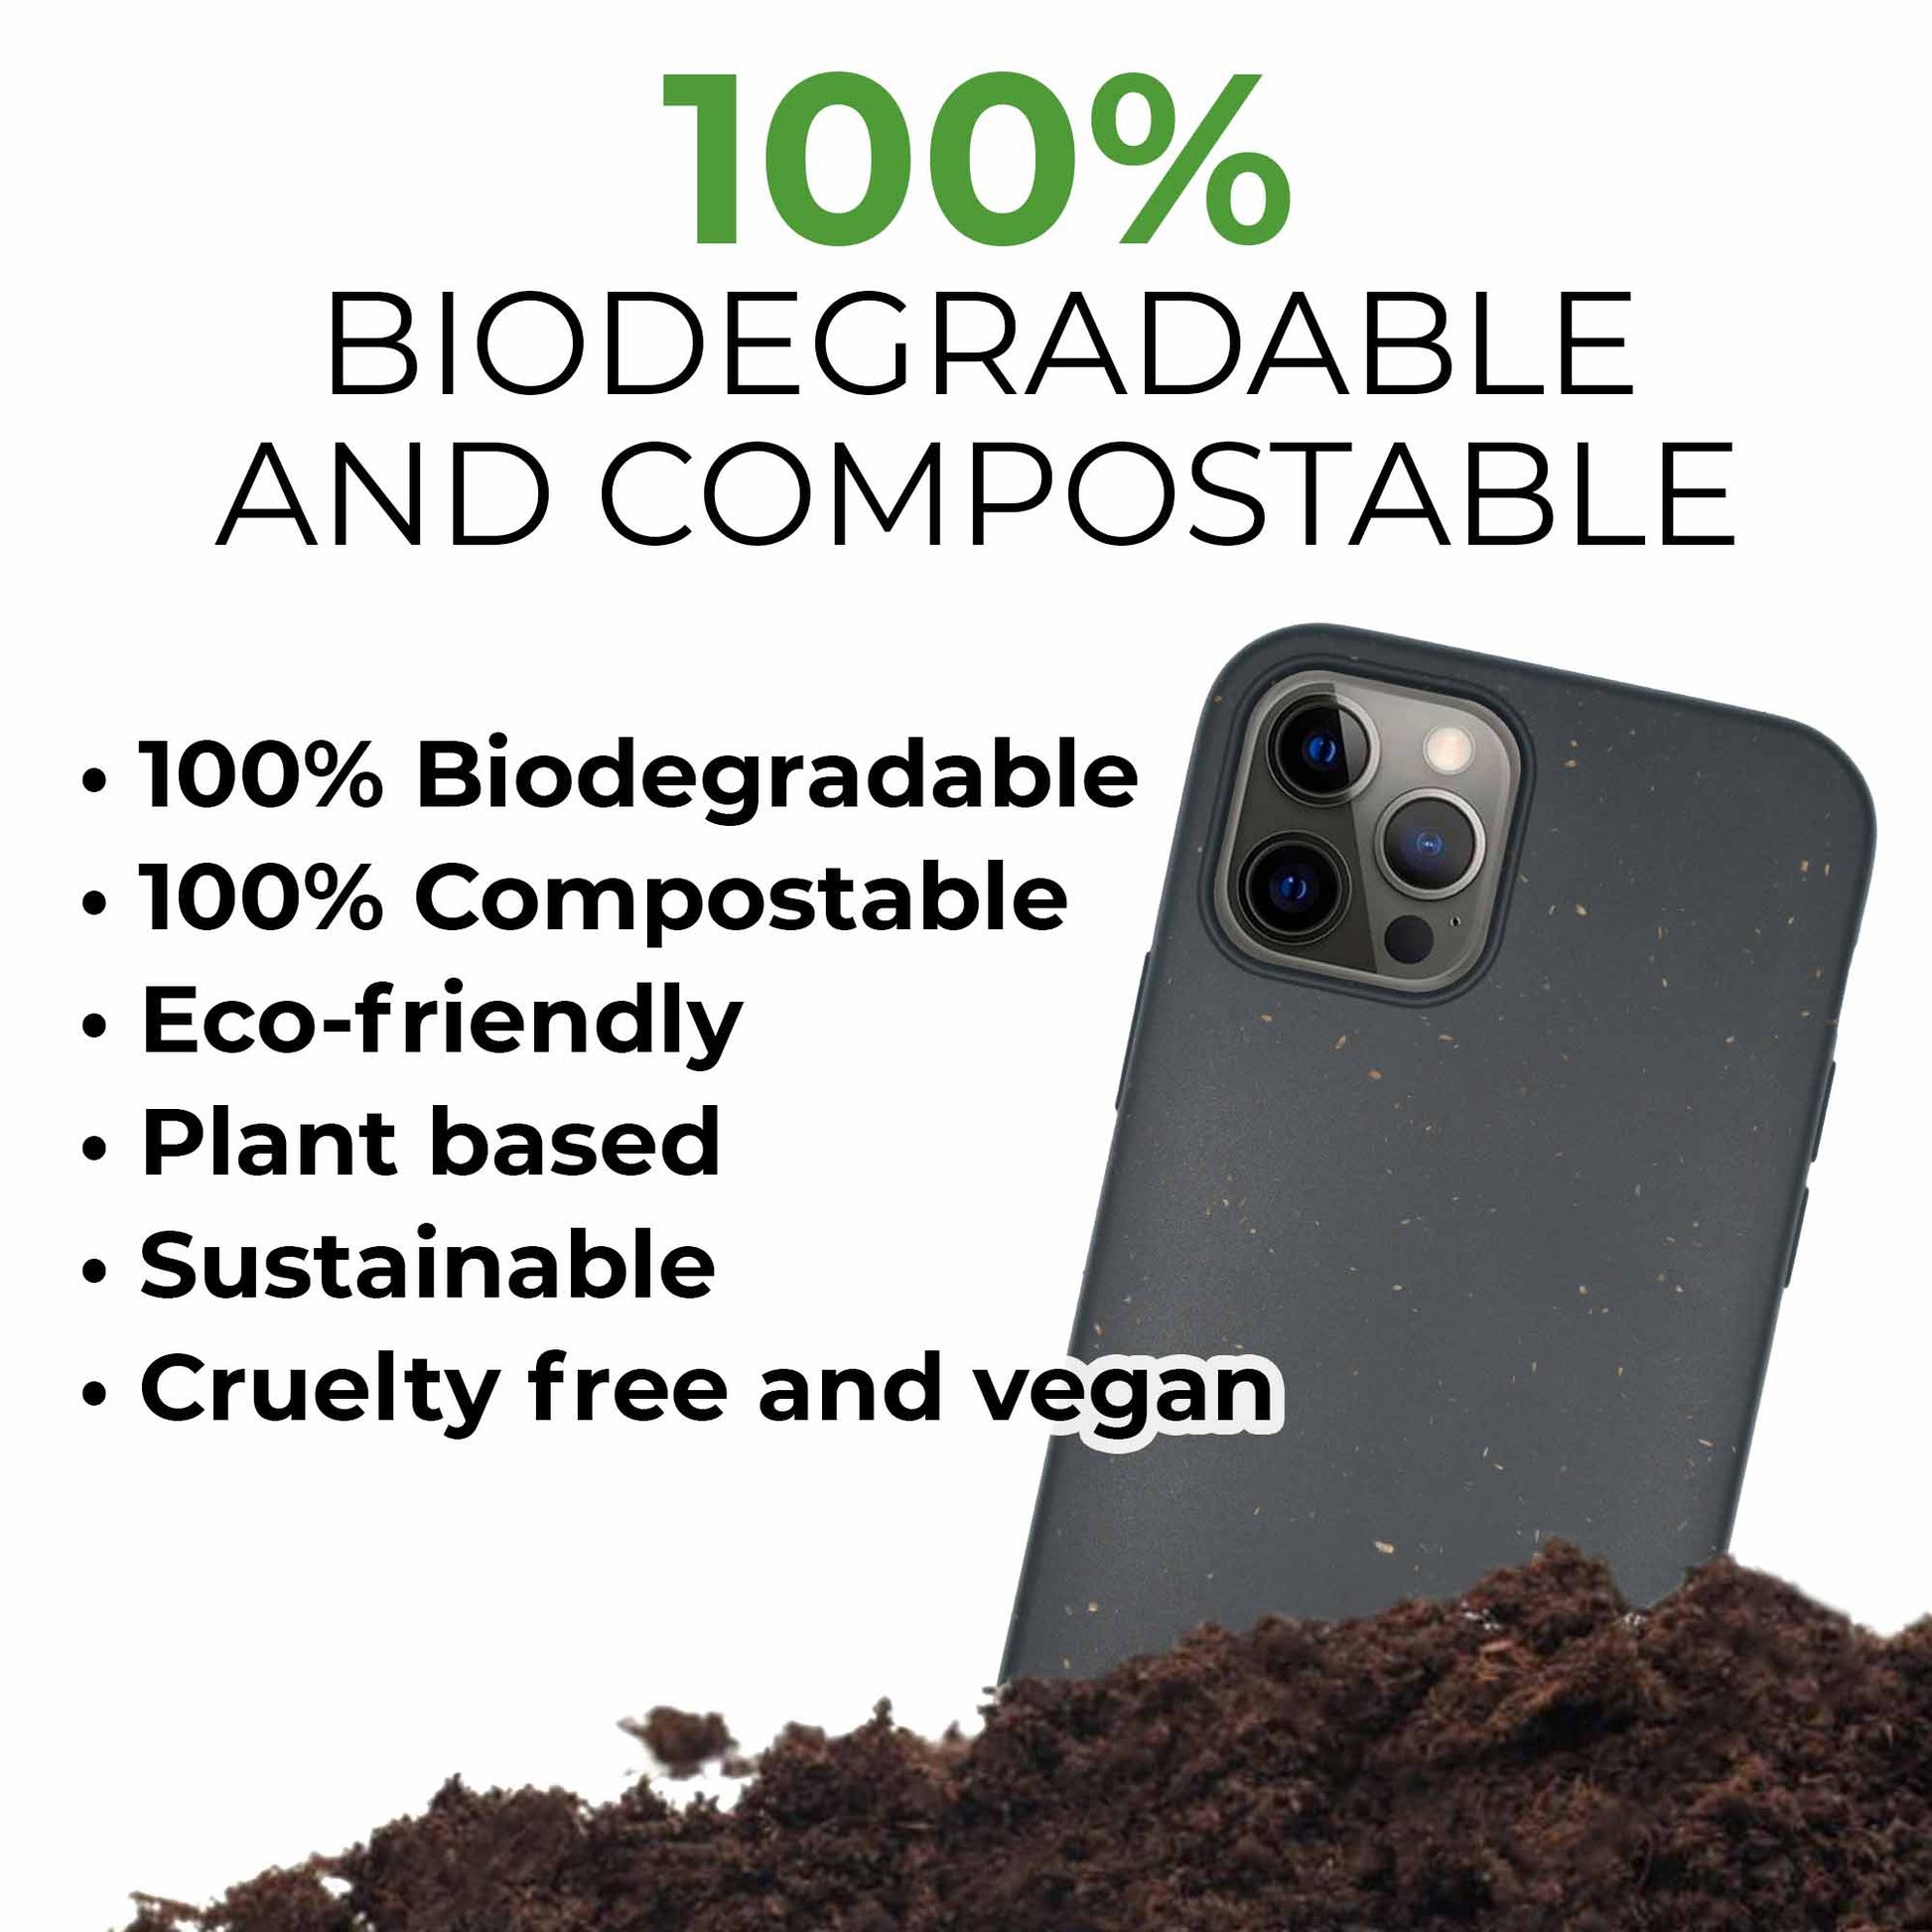 A Tan Lily Biodegradable Personalized Iphone Case - Black on soil, with text highlighting it as "100% Biodegradable and Compostable" and listing eco-friendly attributes.